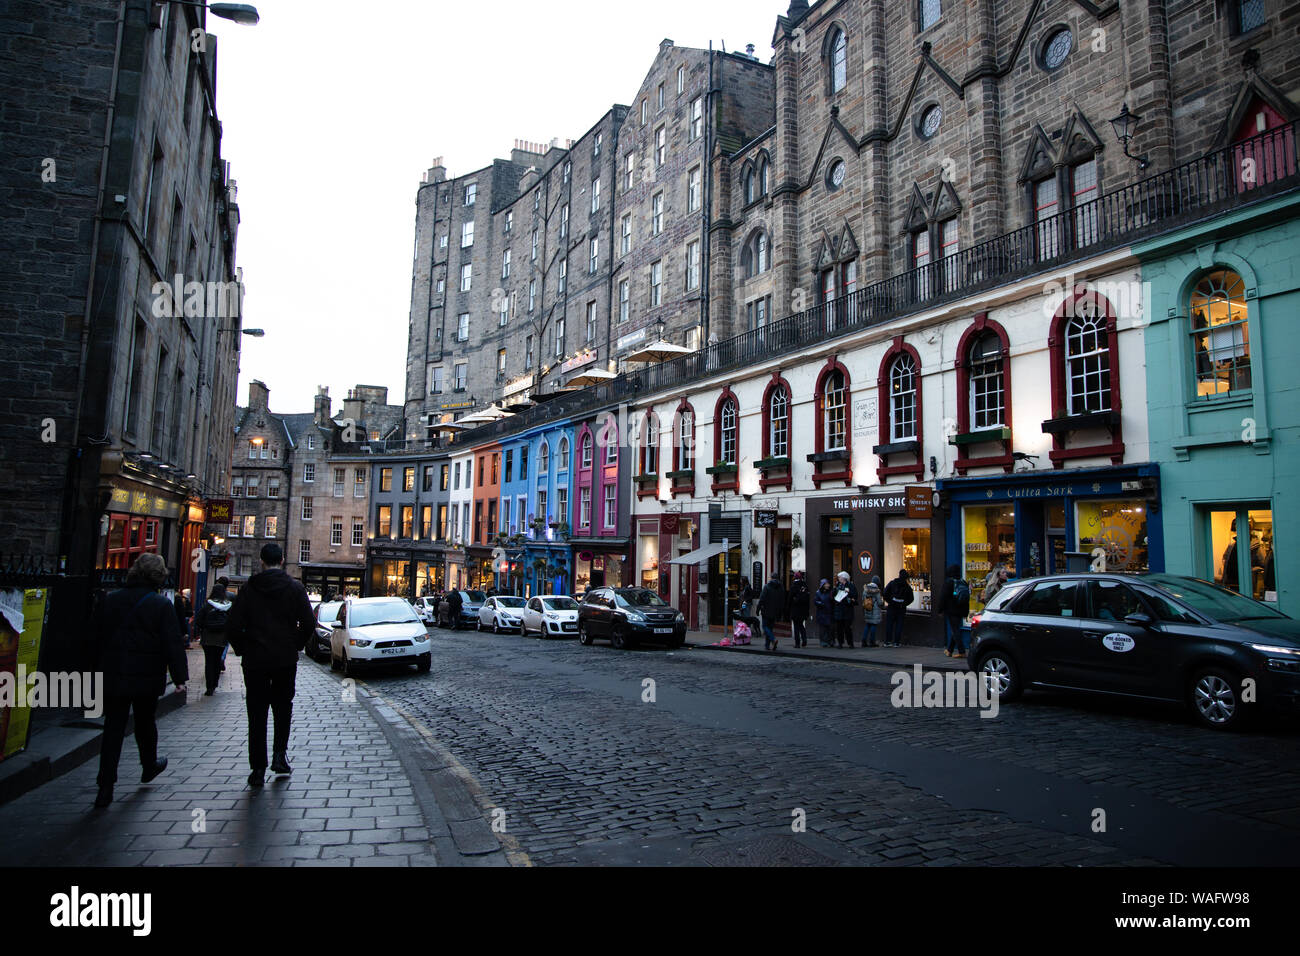 Streetview of Victoria Street with its cobbled road gentle curve and colourful shopfronts Old Town Edinburgh Scotland Stock Photo